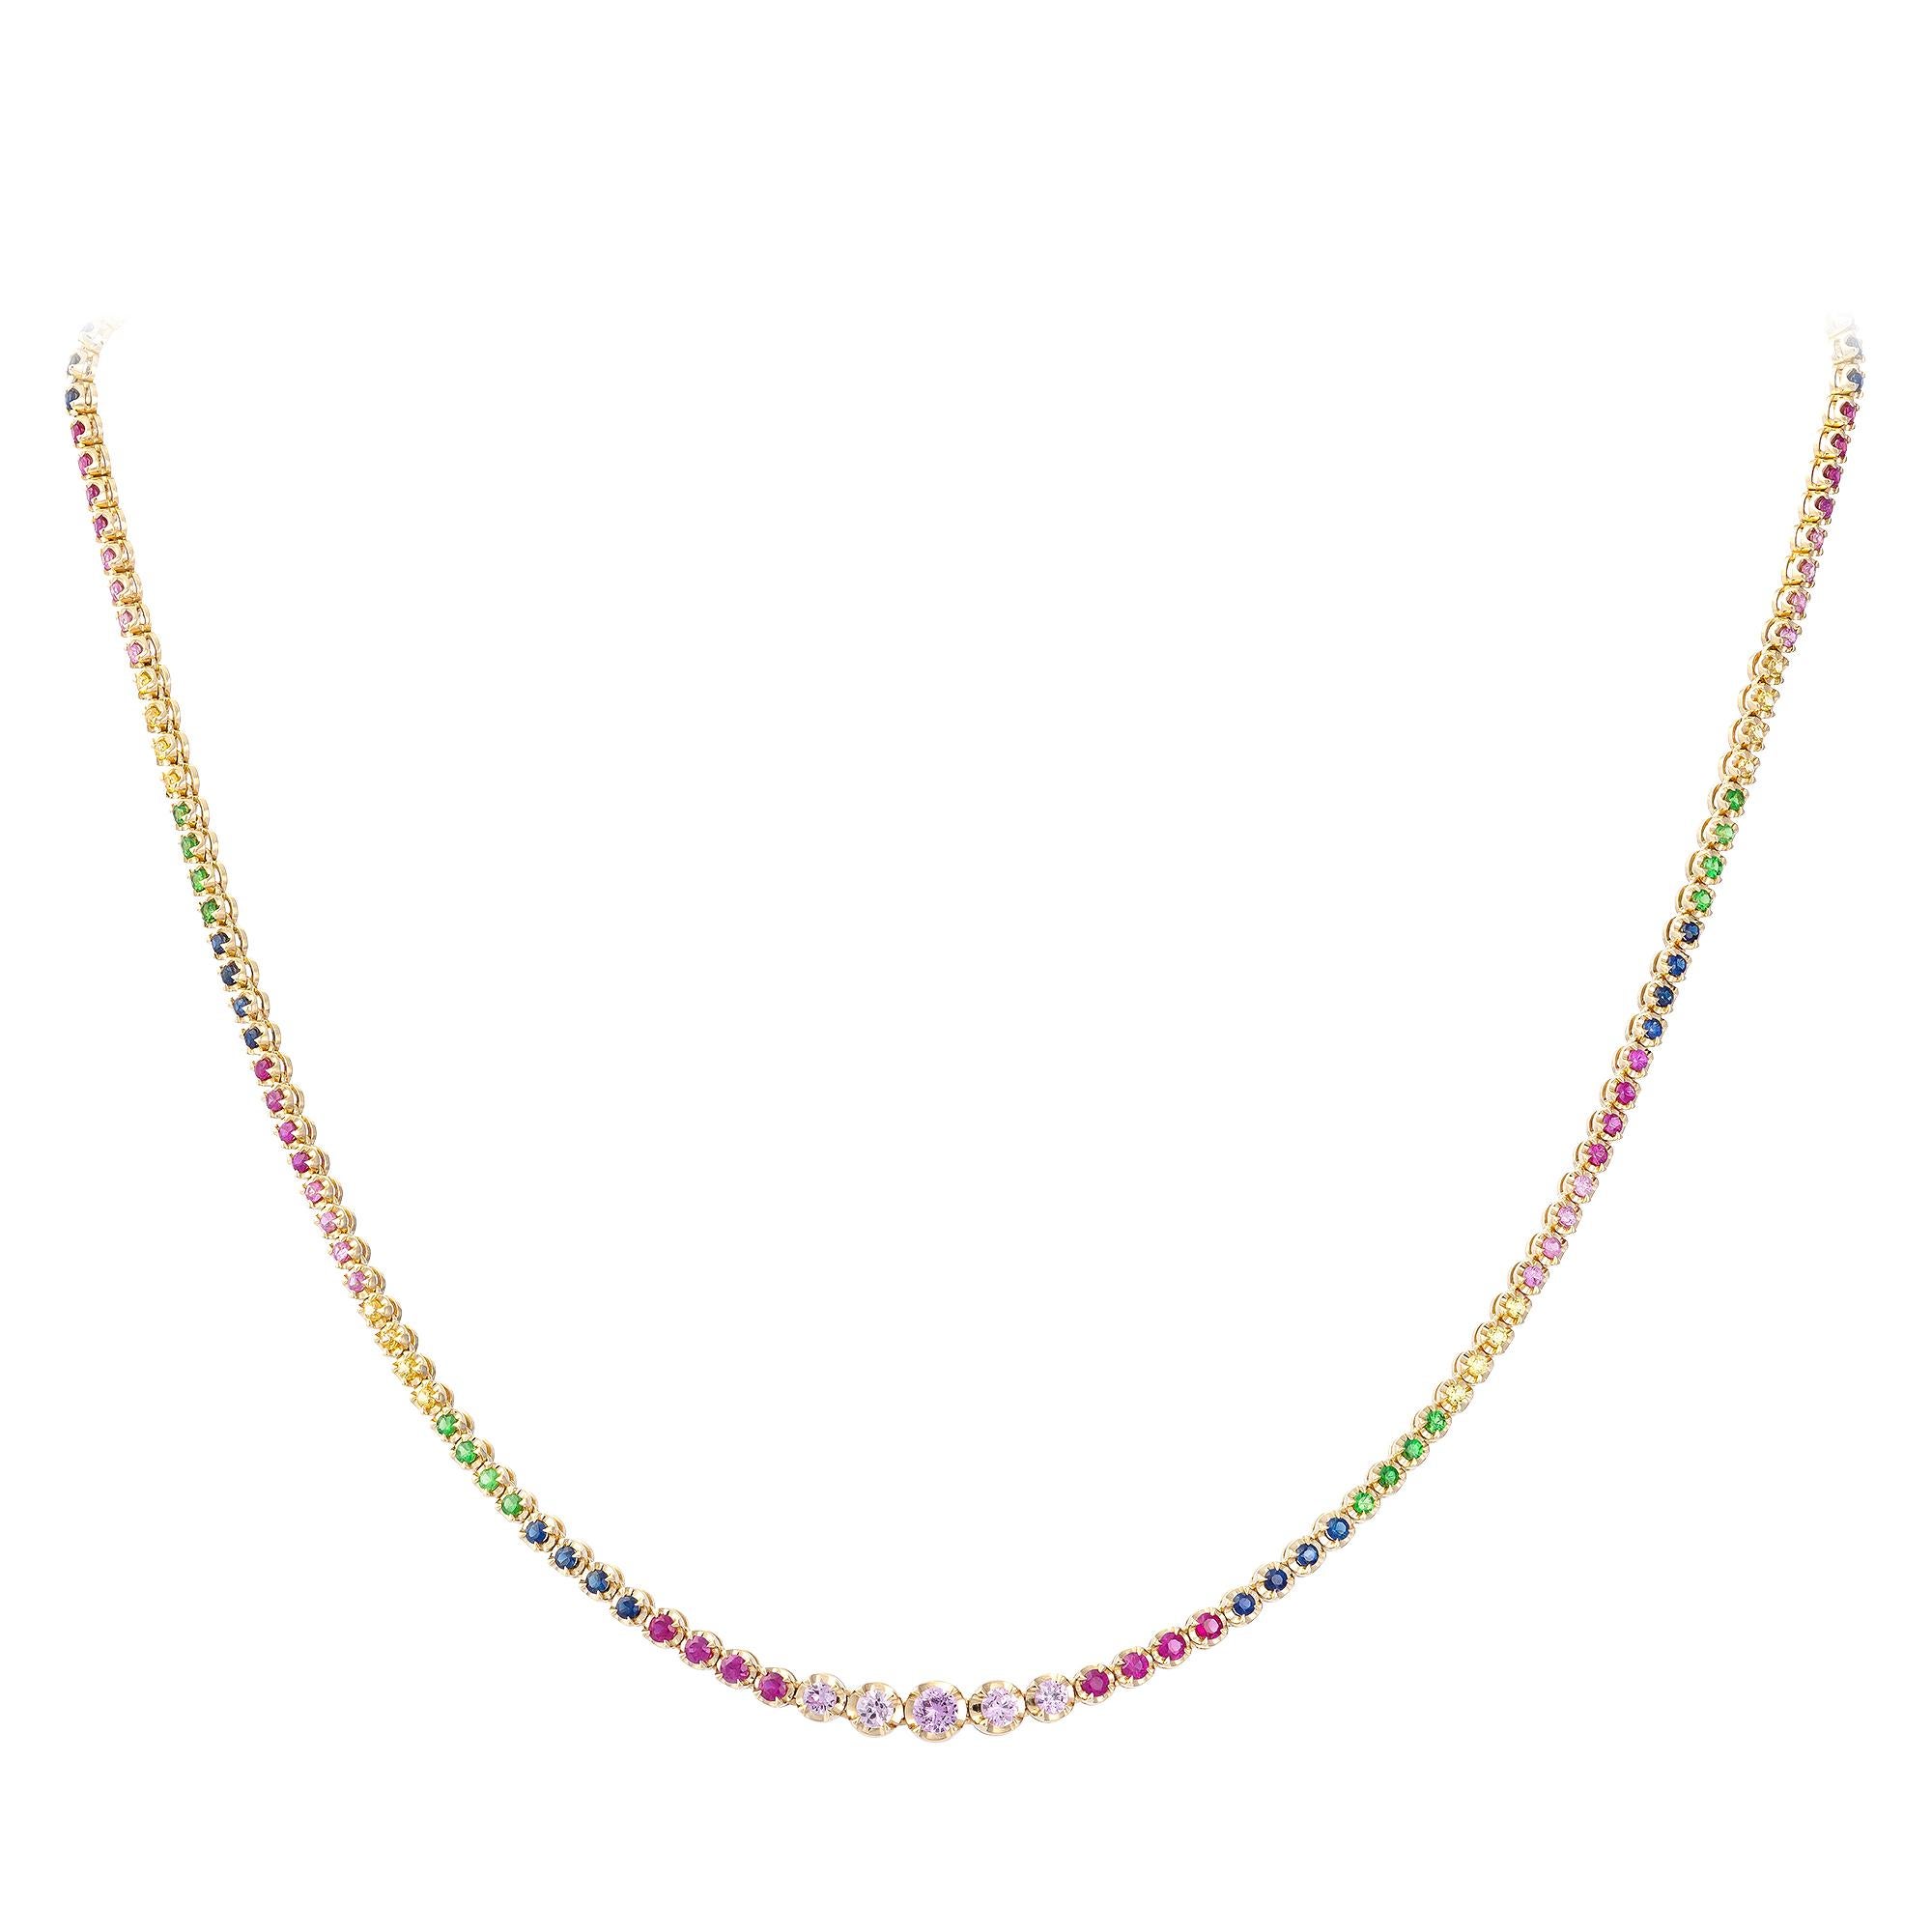 Necklace White Gold 18 K 

Multi Sapphire 3.43 Cts/ 154 Pcs

Weight 12,34 grams

With a heritage of ancient fine Swiss jewelry traditions, NATKINA is a Geneva based jewellery brand, which creates modern jewellery masterpieces suitable for every day